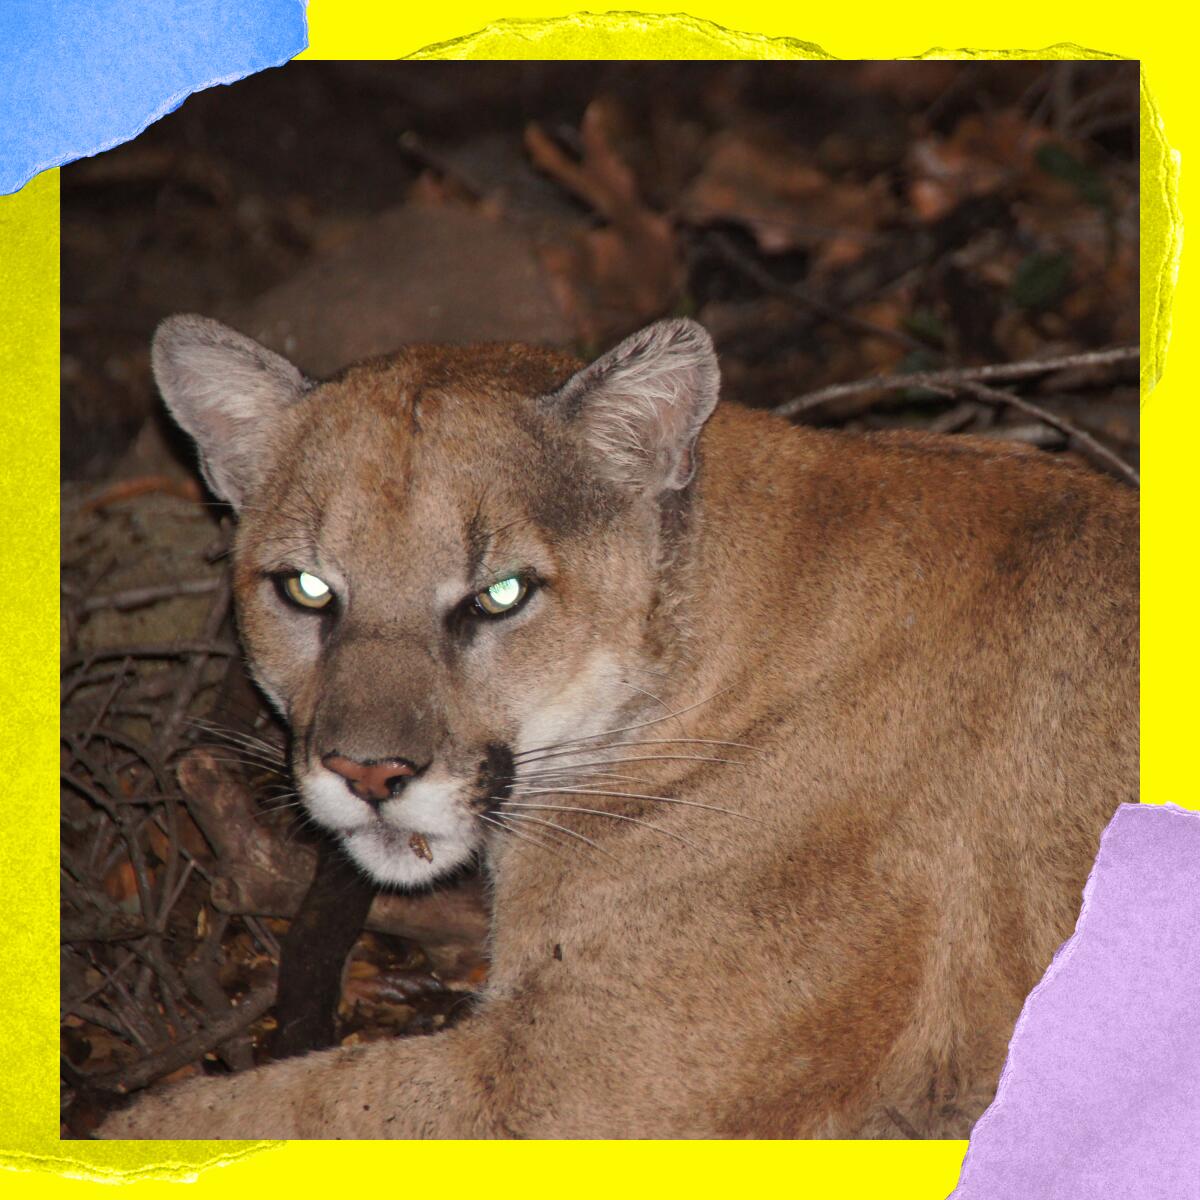 Close-up of a mountain lion; his eyes glow from the reflection of the camera flash.